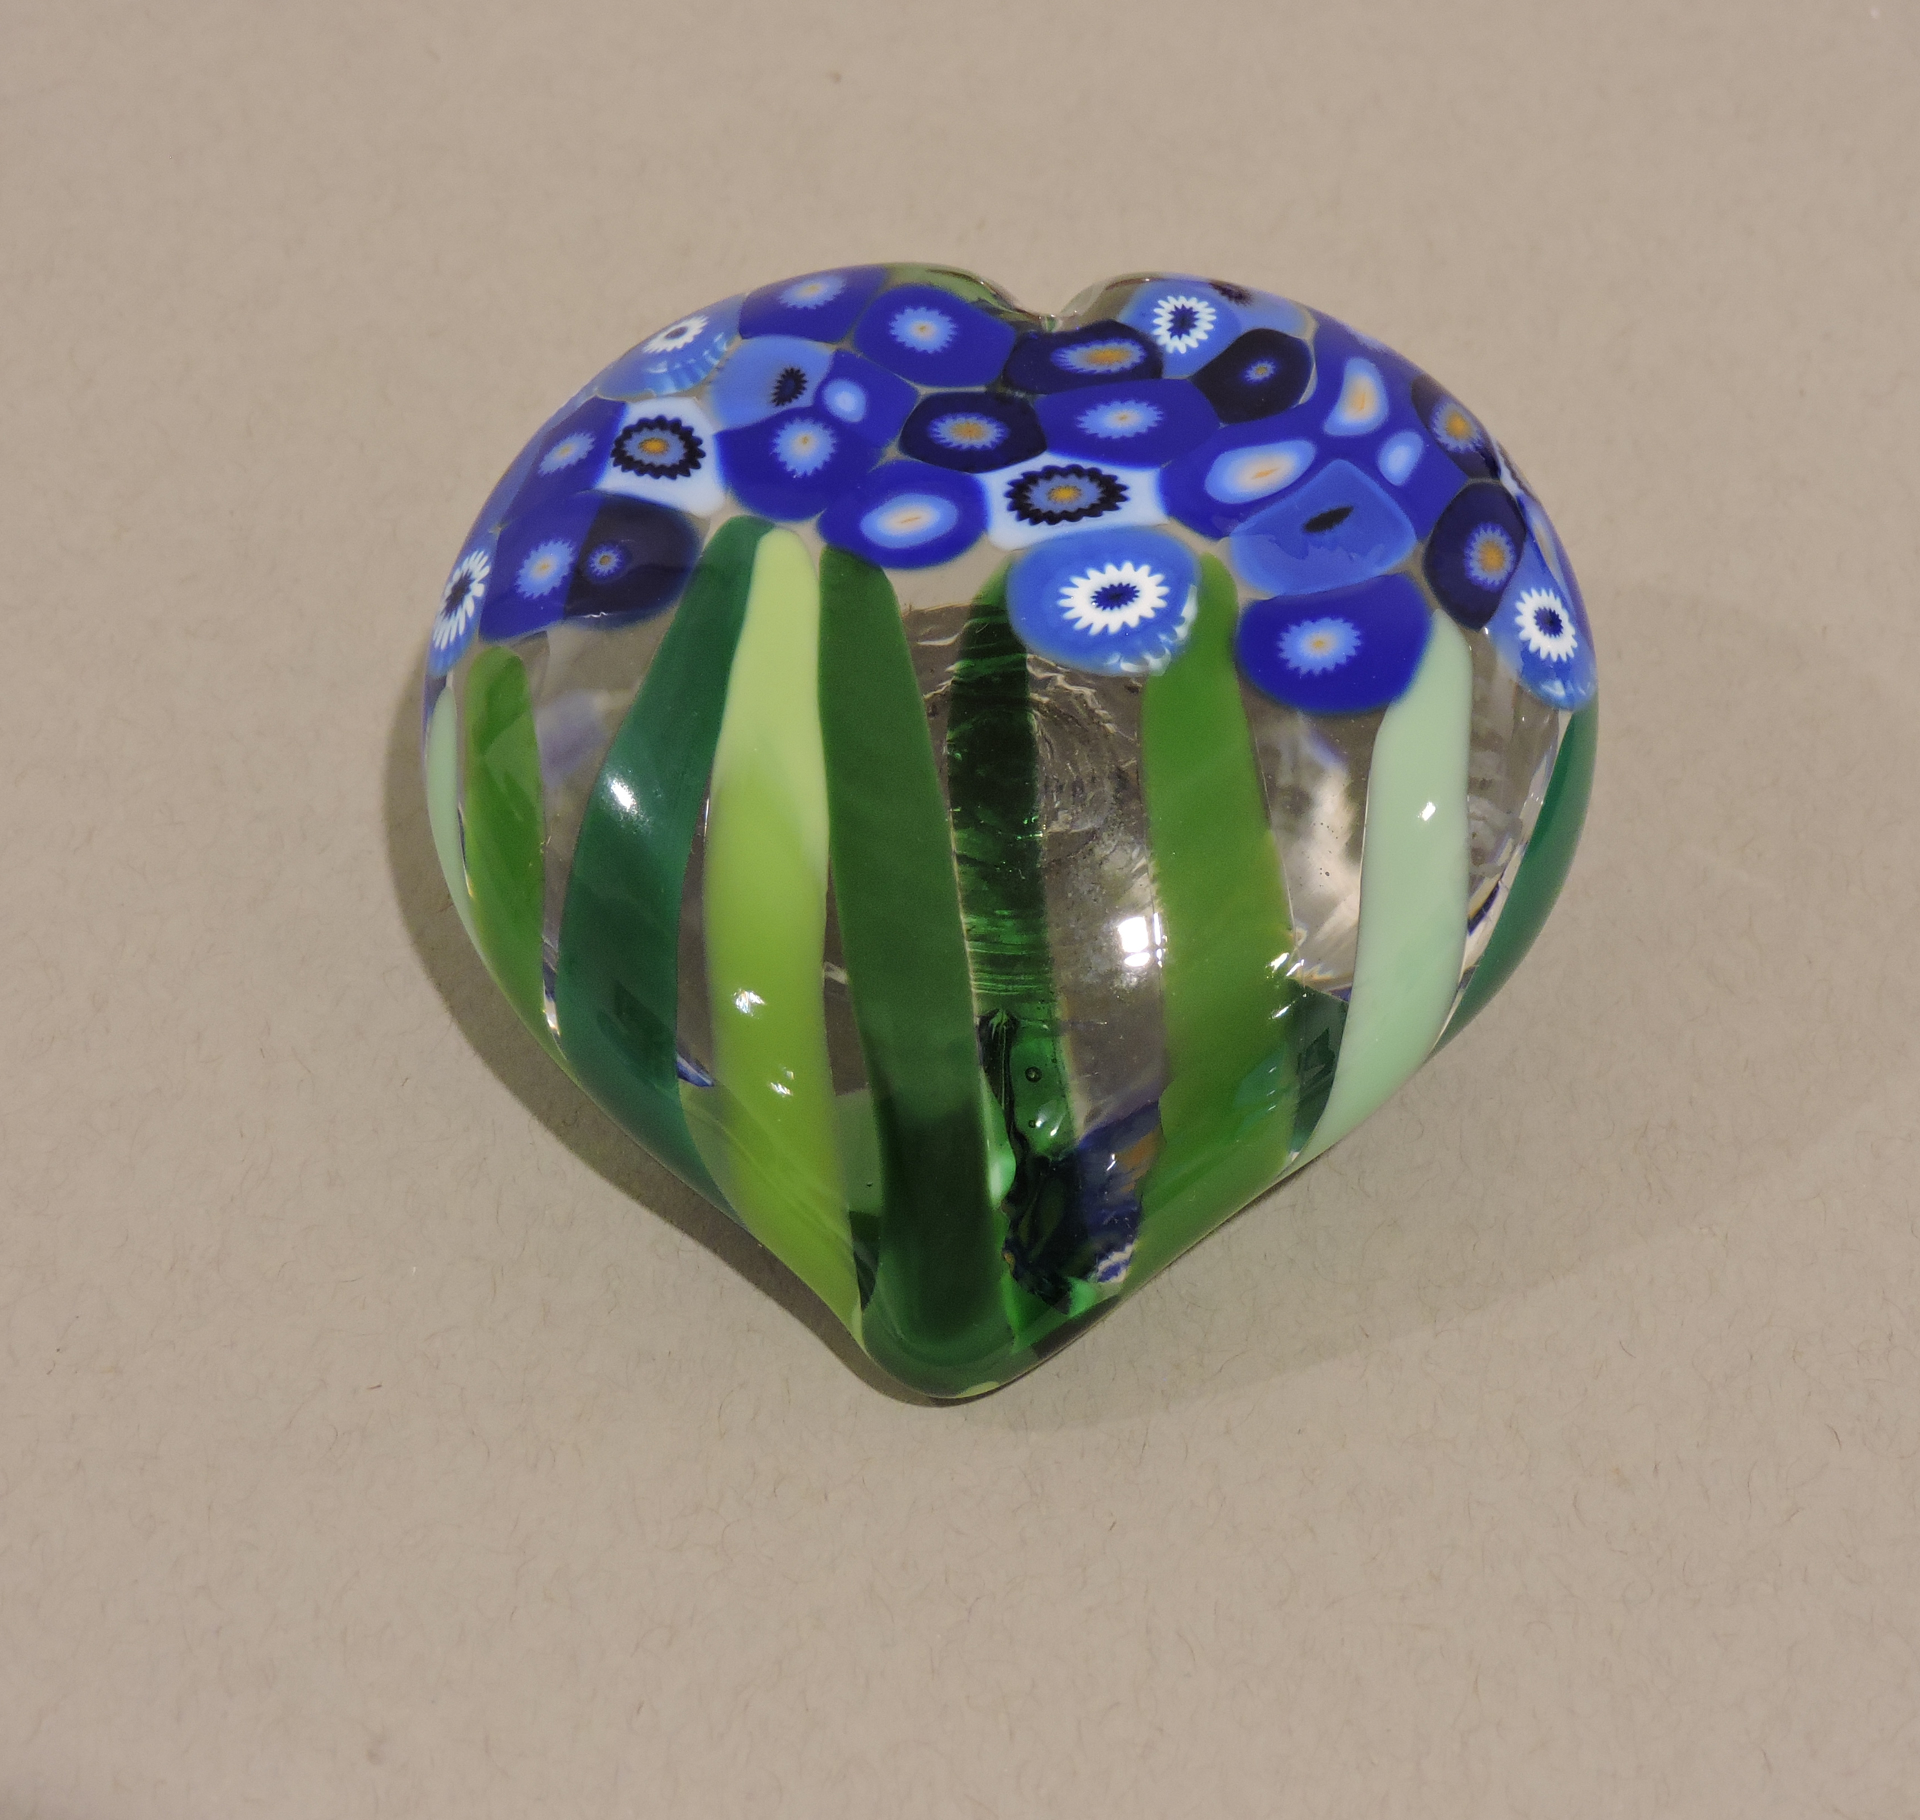 Heart paperweight by Mad Art Studios